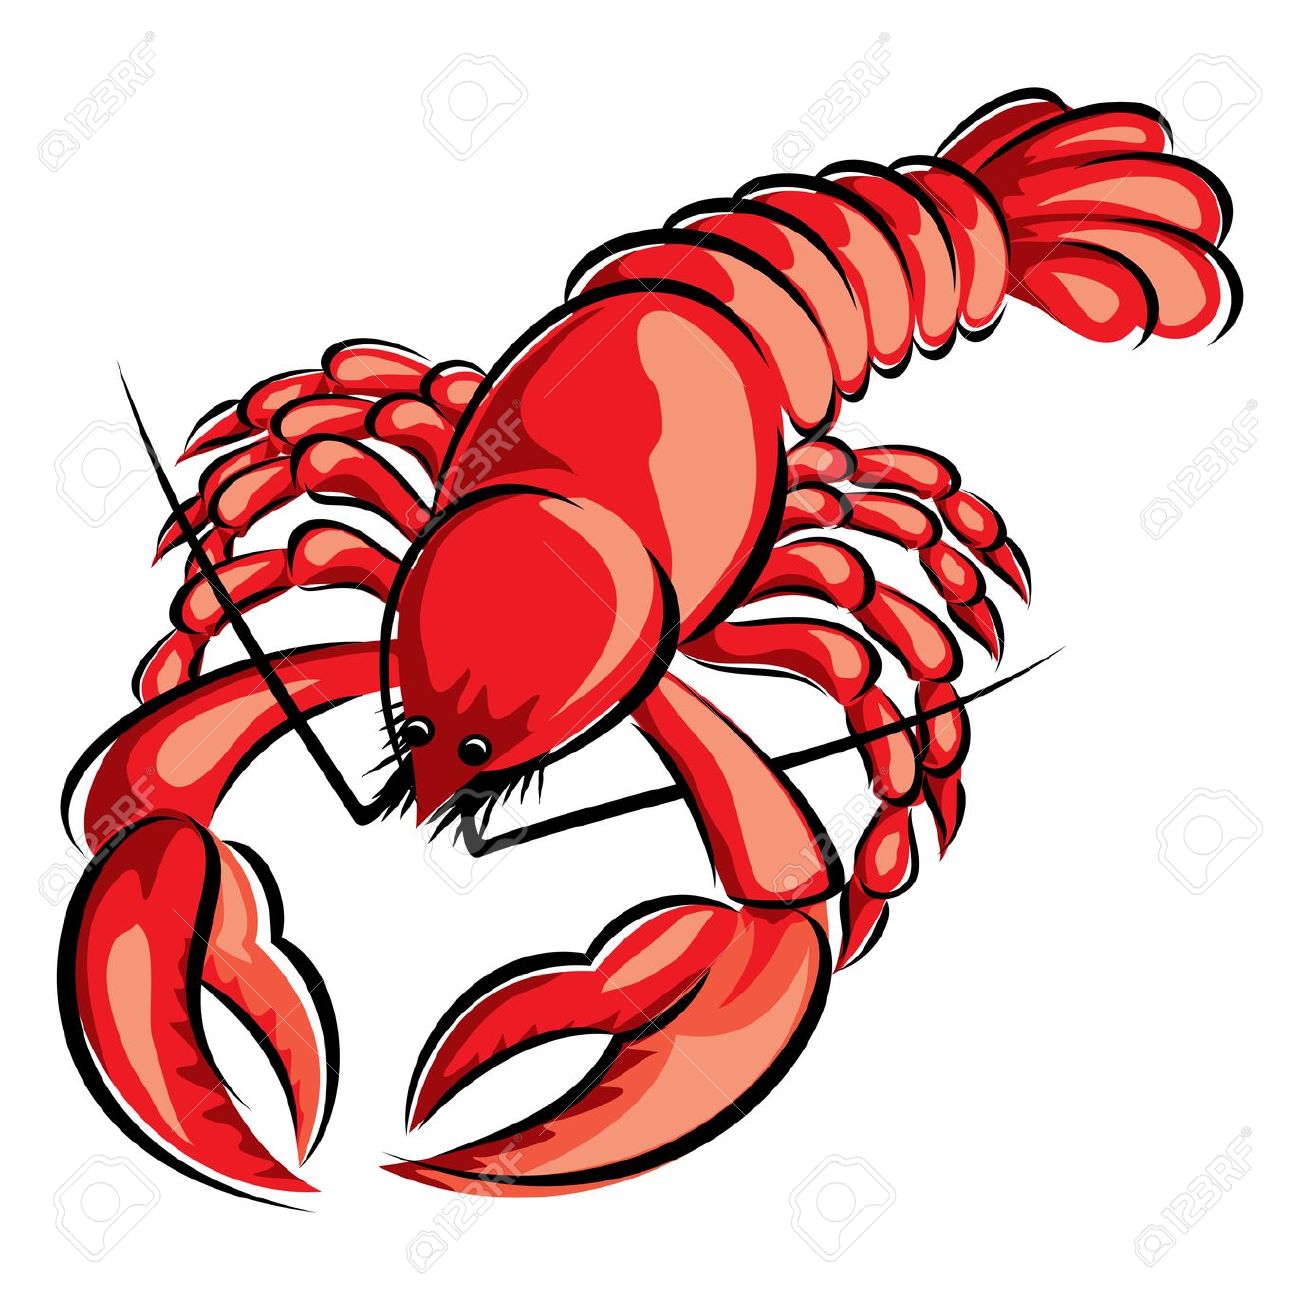 Lobster Hd Photo Clipart